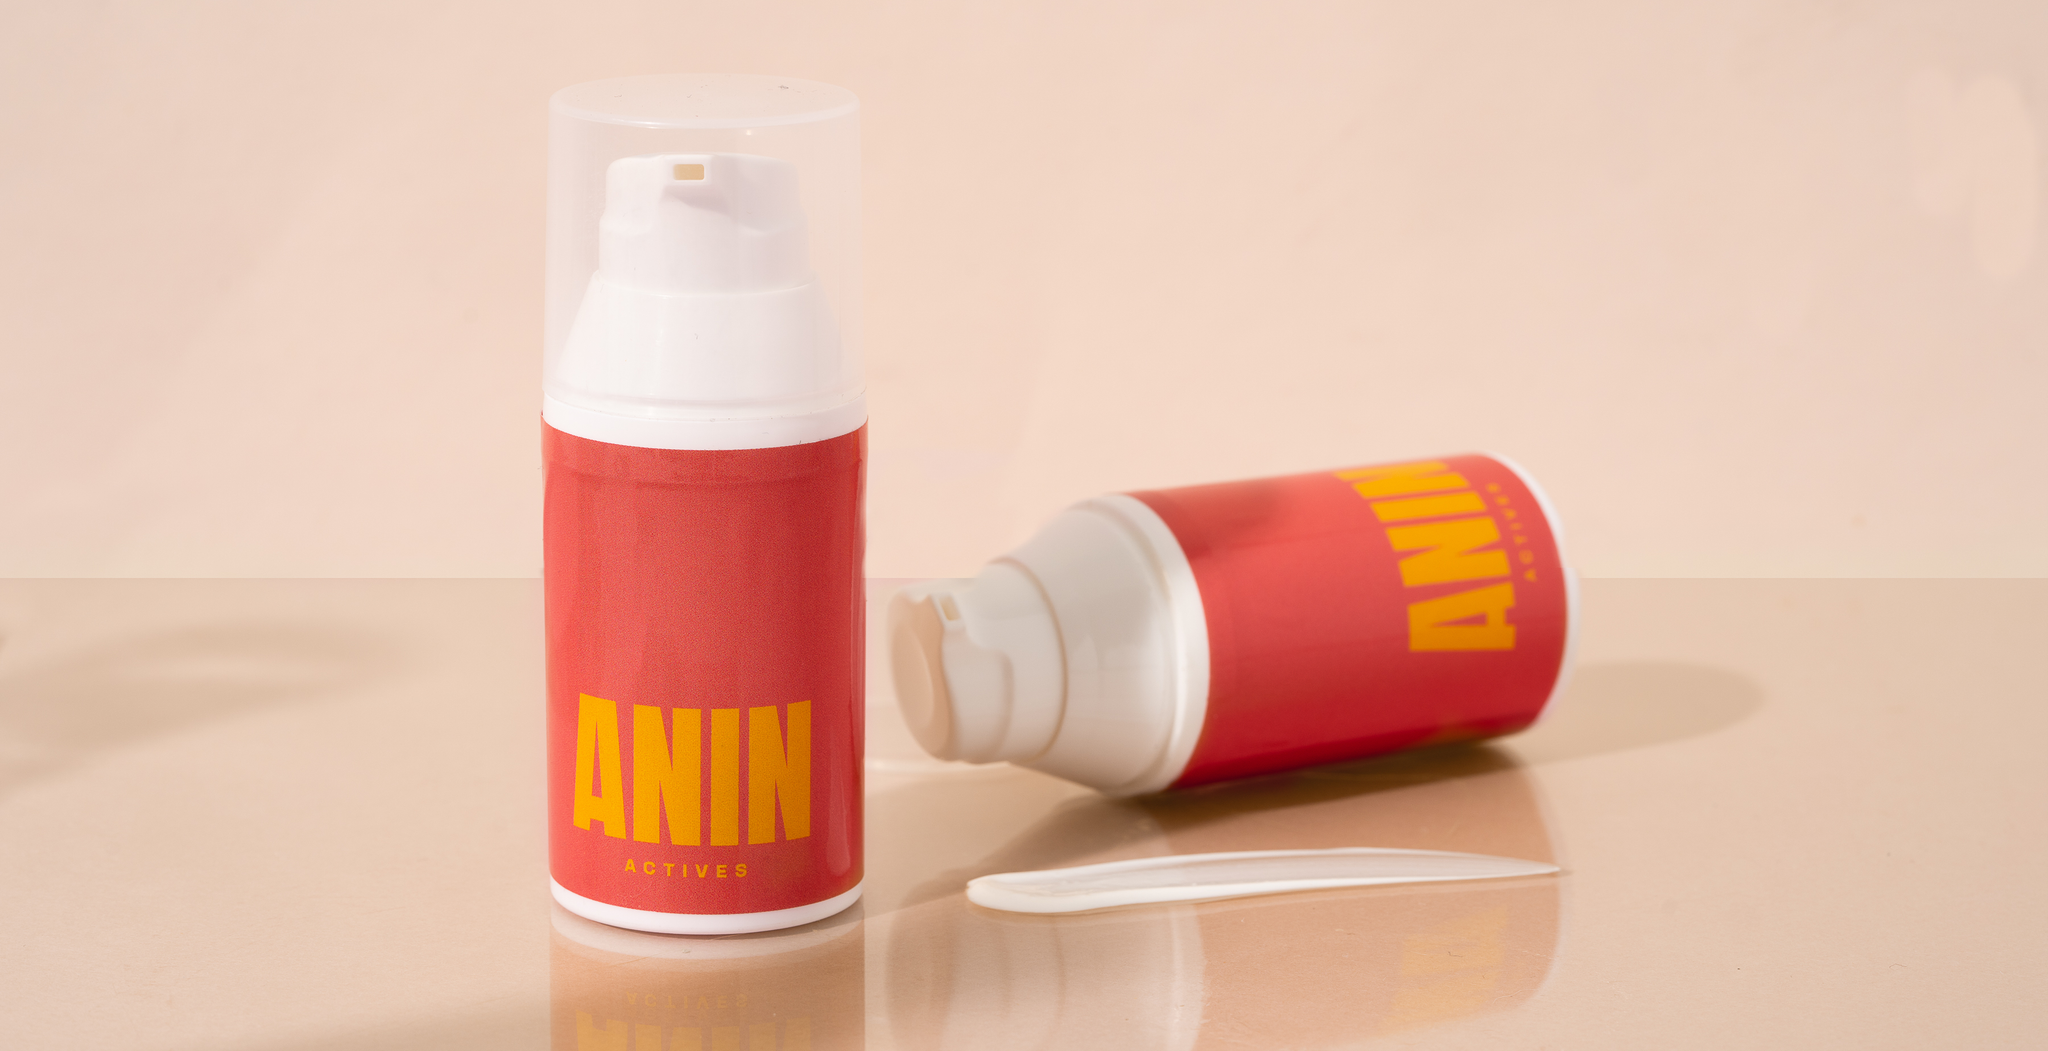 Two ANIN Actives personalized prescription bottles one standing upright the other to the left placed on the side. A white sample of the ANIN Actives prescription cream is spread in front on the ANIN Actives bottle. 